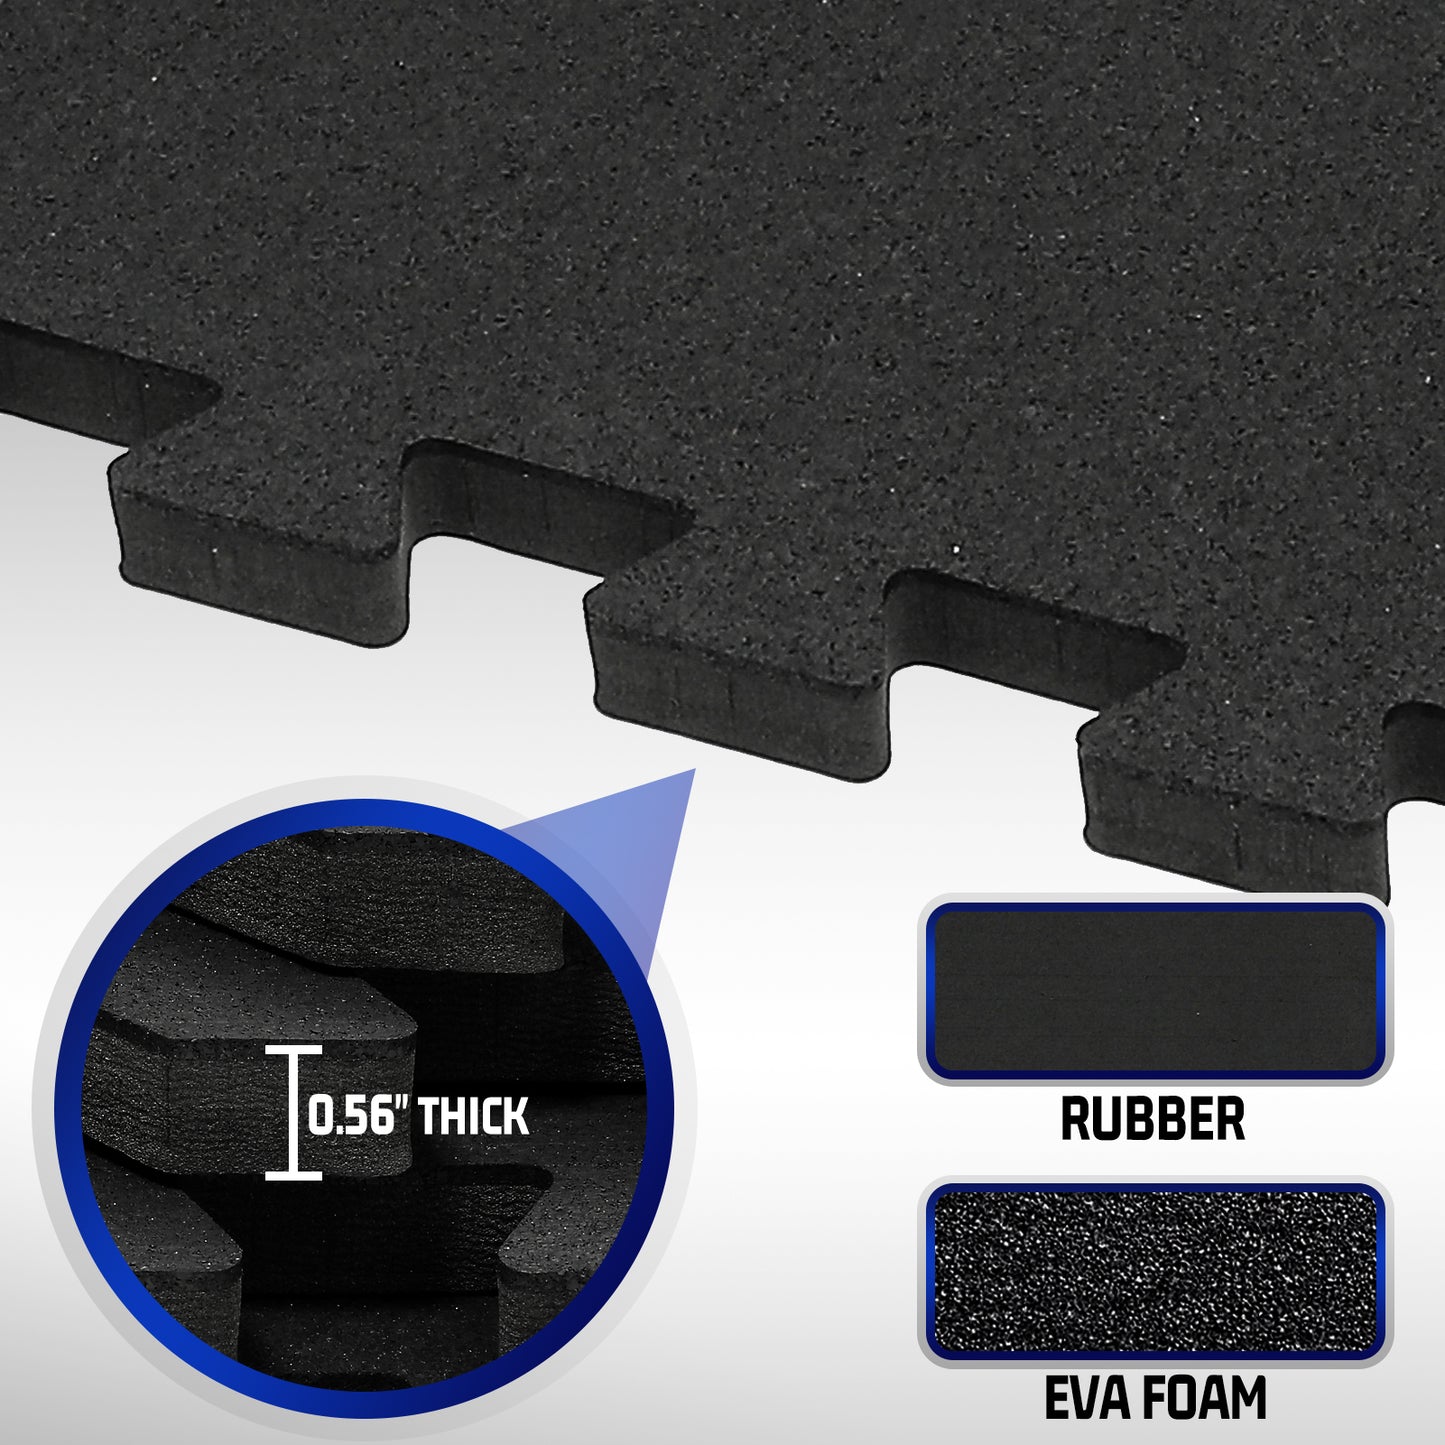 SUPERJARE 056“ Thick Exercise Equipment Mats, EVA Foam Mats with Rubber Top - 9602D